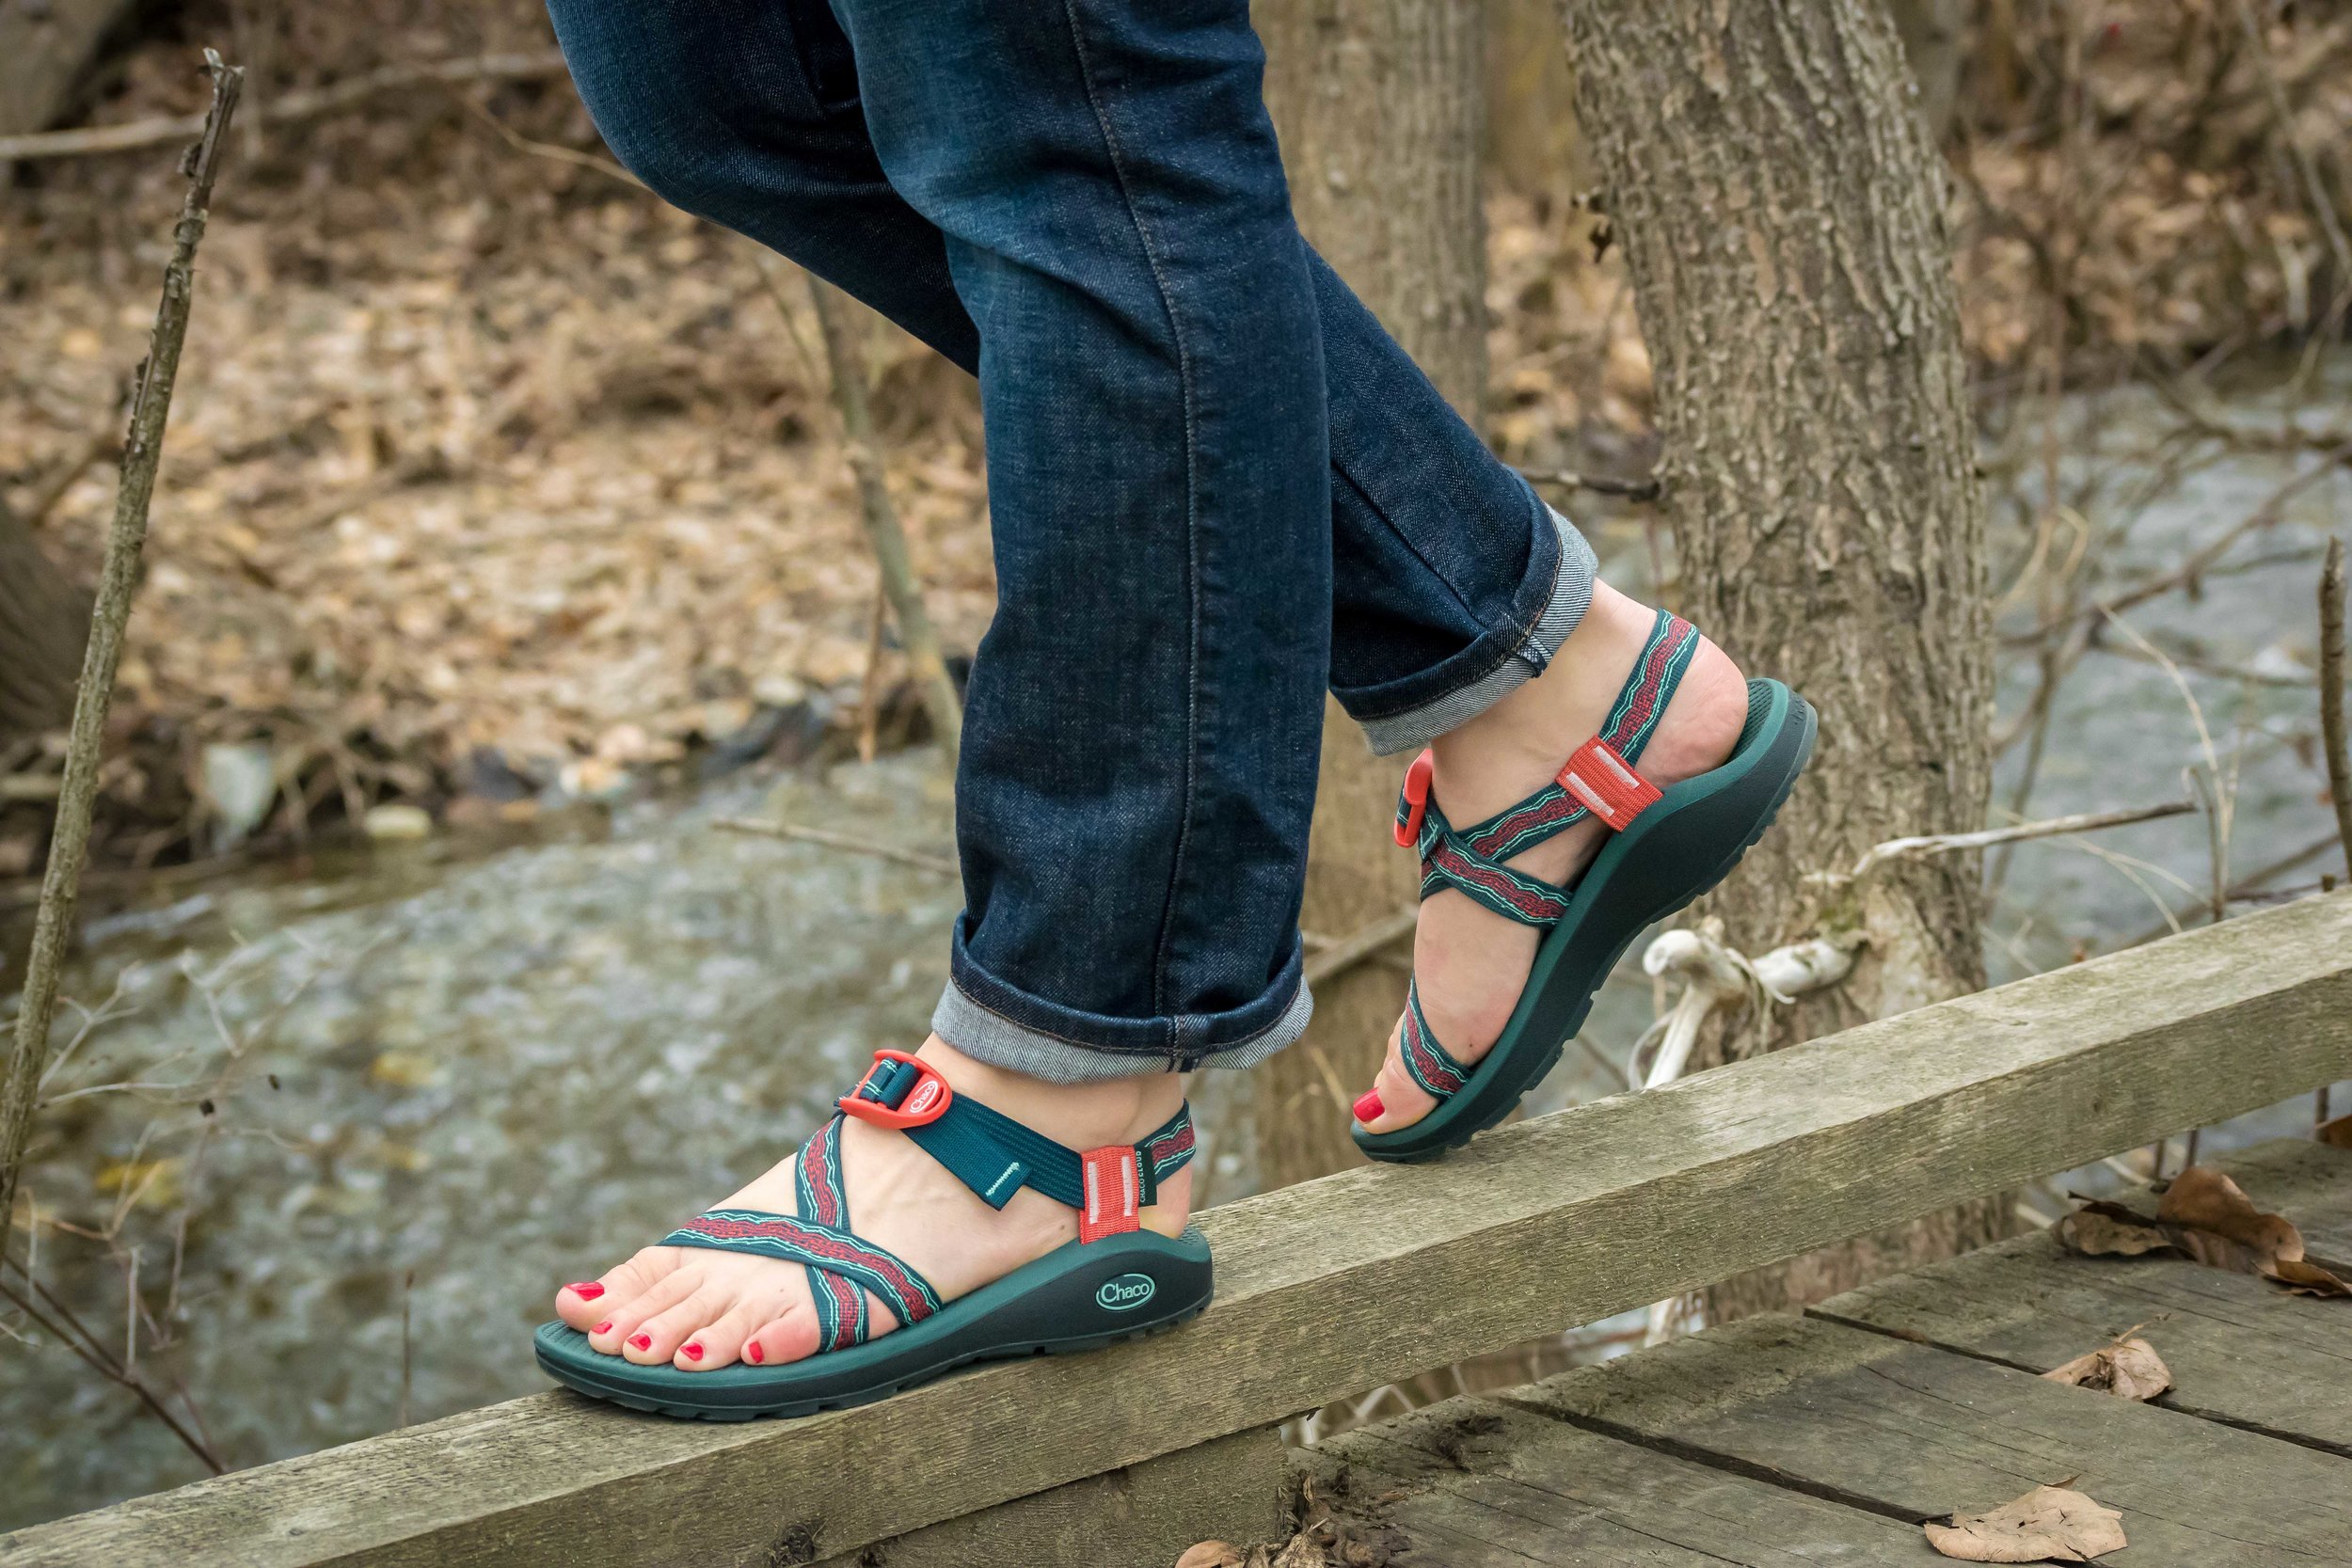 chaco sandals on feet